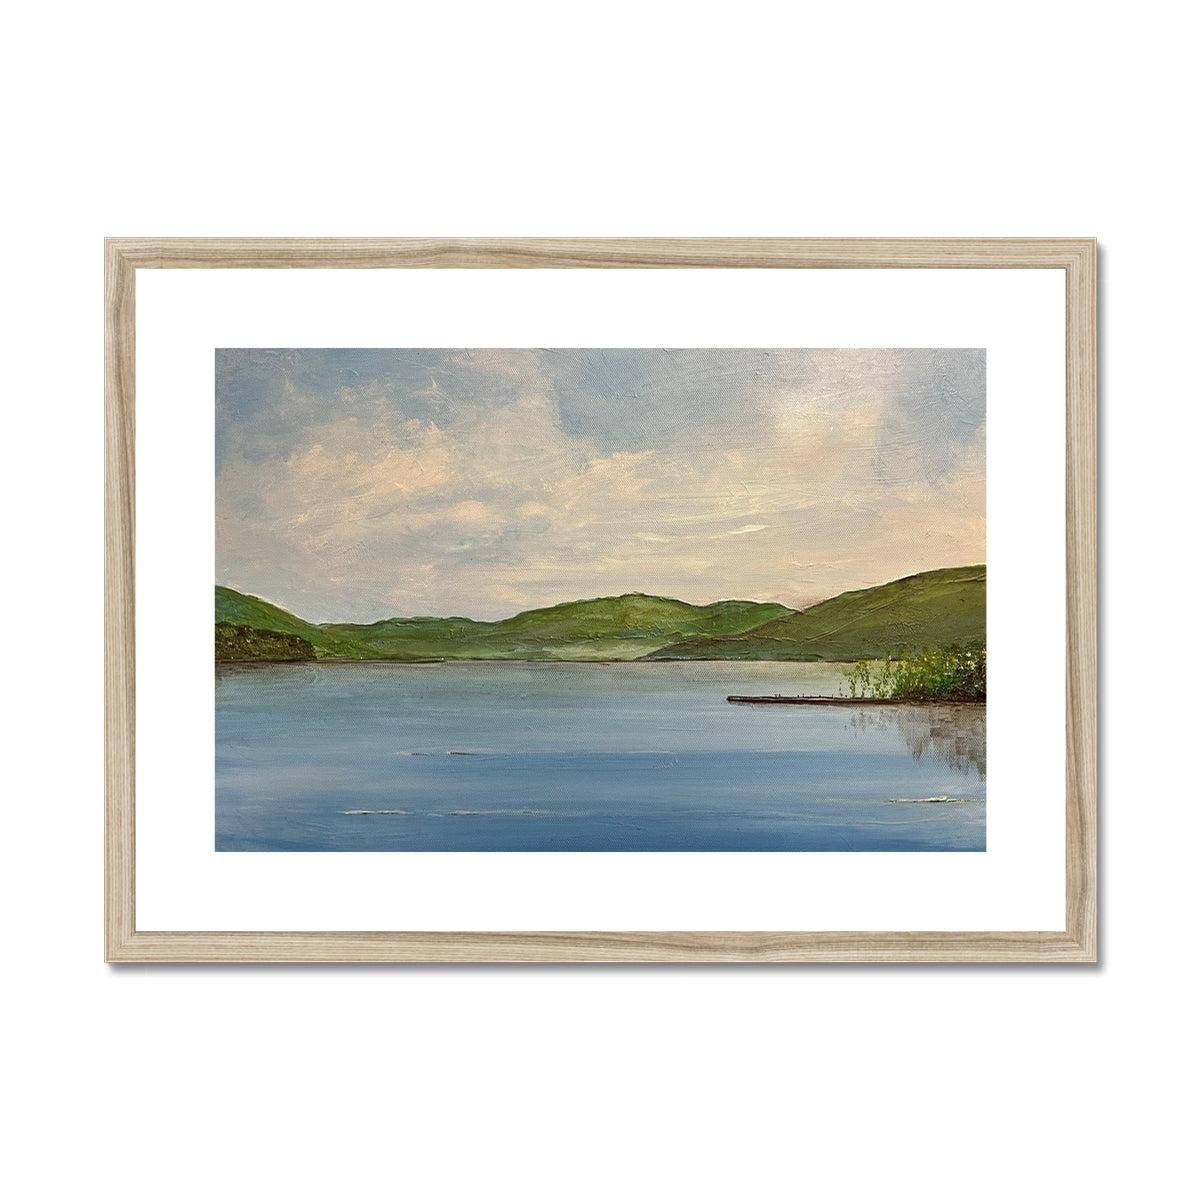 Loch Tay ii Painting | Framed & Mounted Prints From Scotland-Framed & Mounted Prints-Scottish Lochs & Mountains Art Gallery-A2 Landscape-Natural Frame-Paintings, Prints, Homeware, Art Gifts From Scotland By Scottish Artist Kevin Hunter